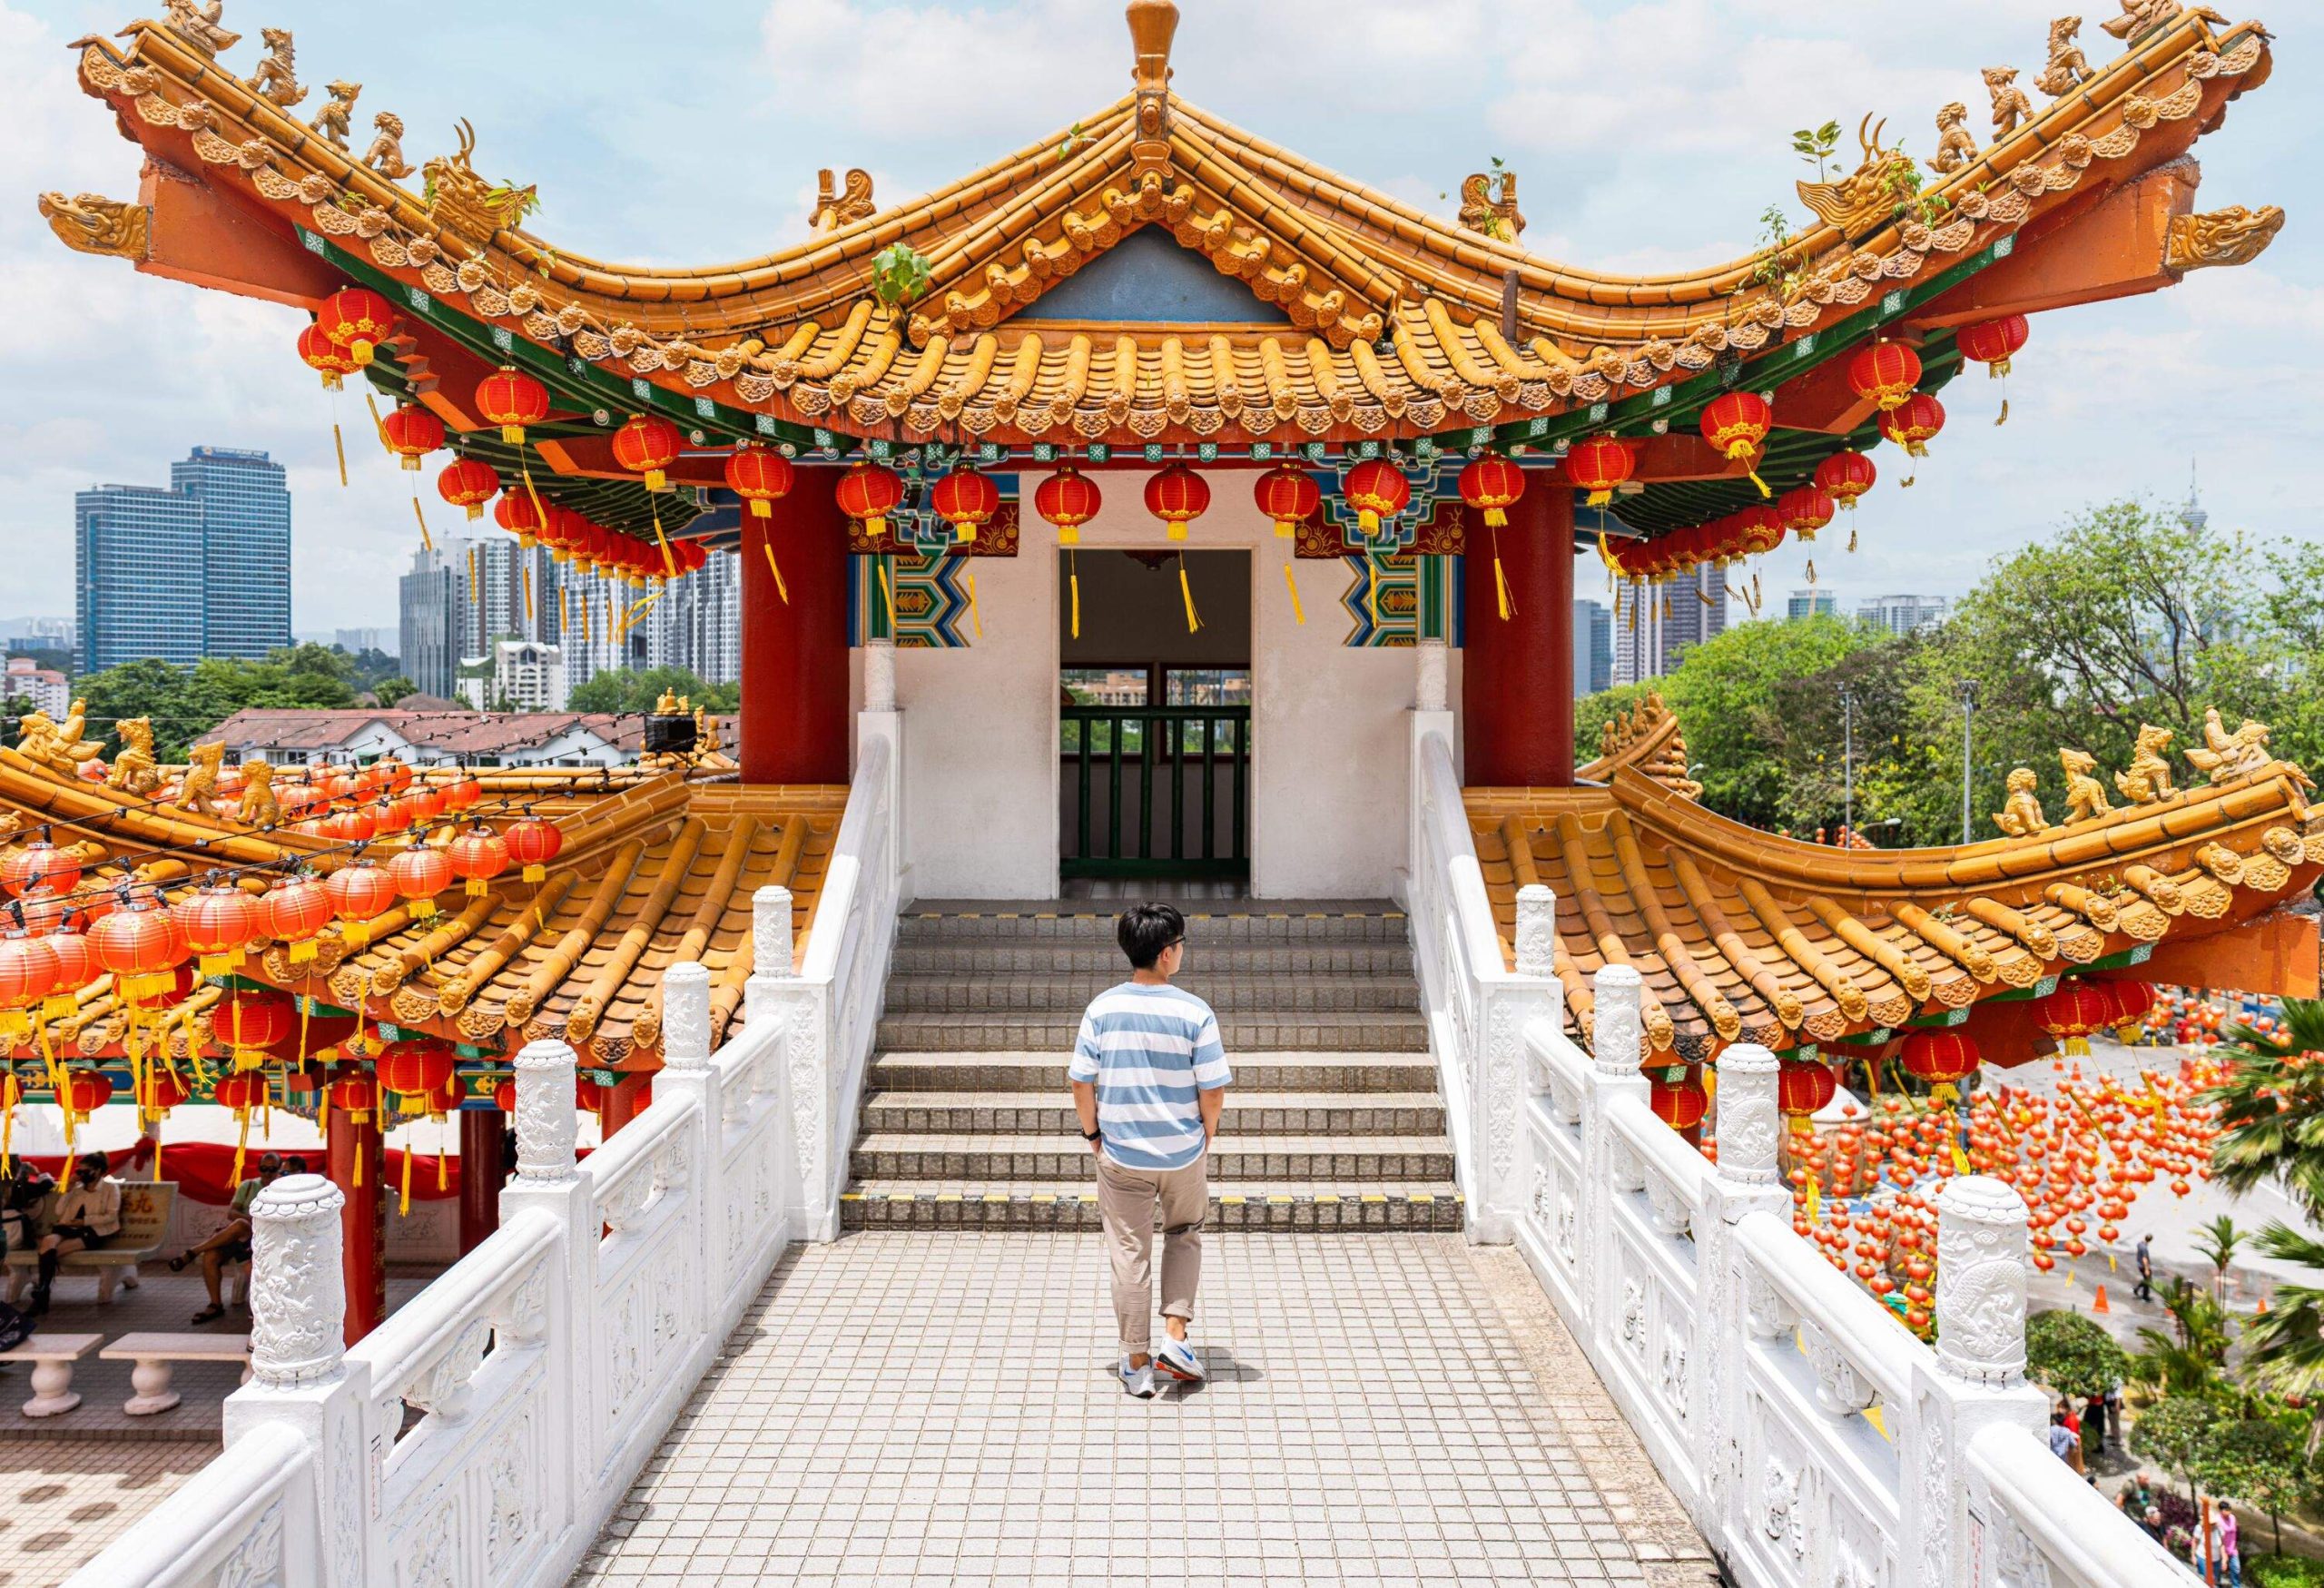 A tourist visits Thean Hou Chinese Temple in Kuala Lumpur.